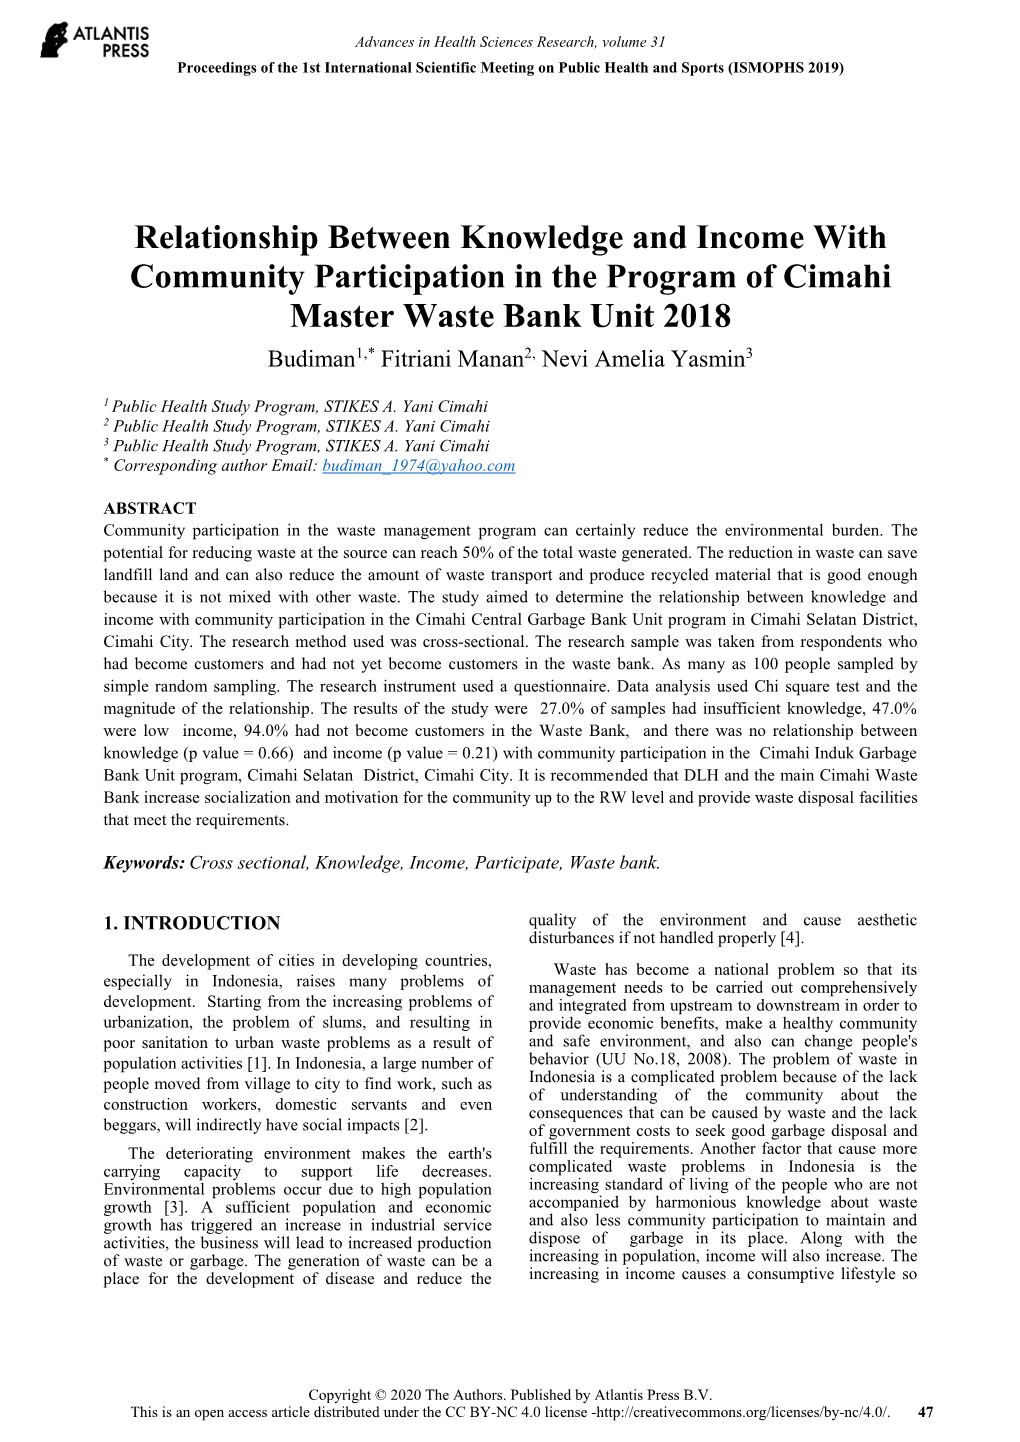 Relationship Between Knowledge and Income with Community